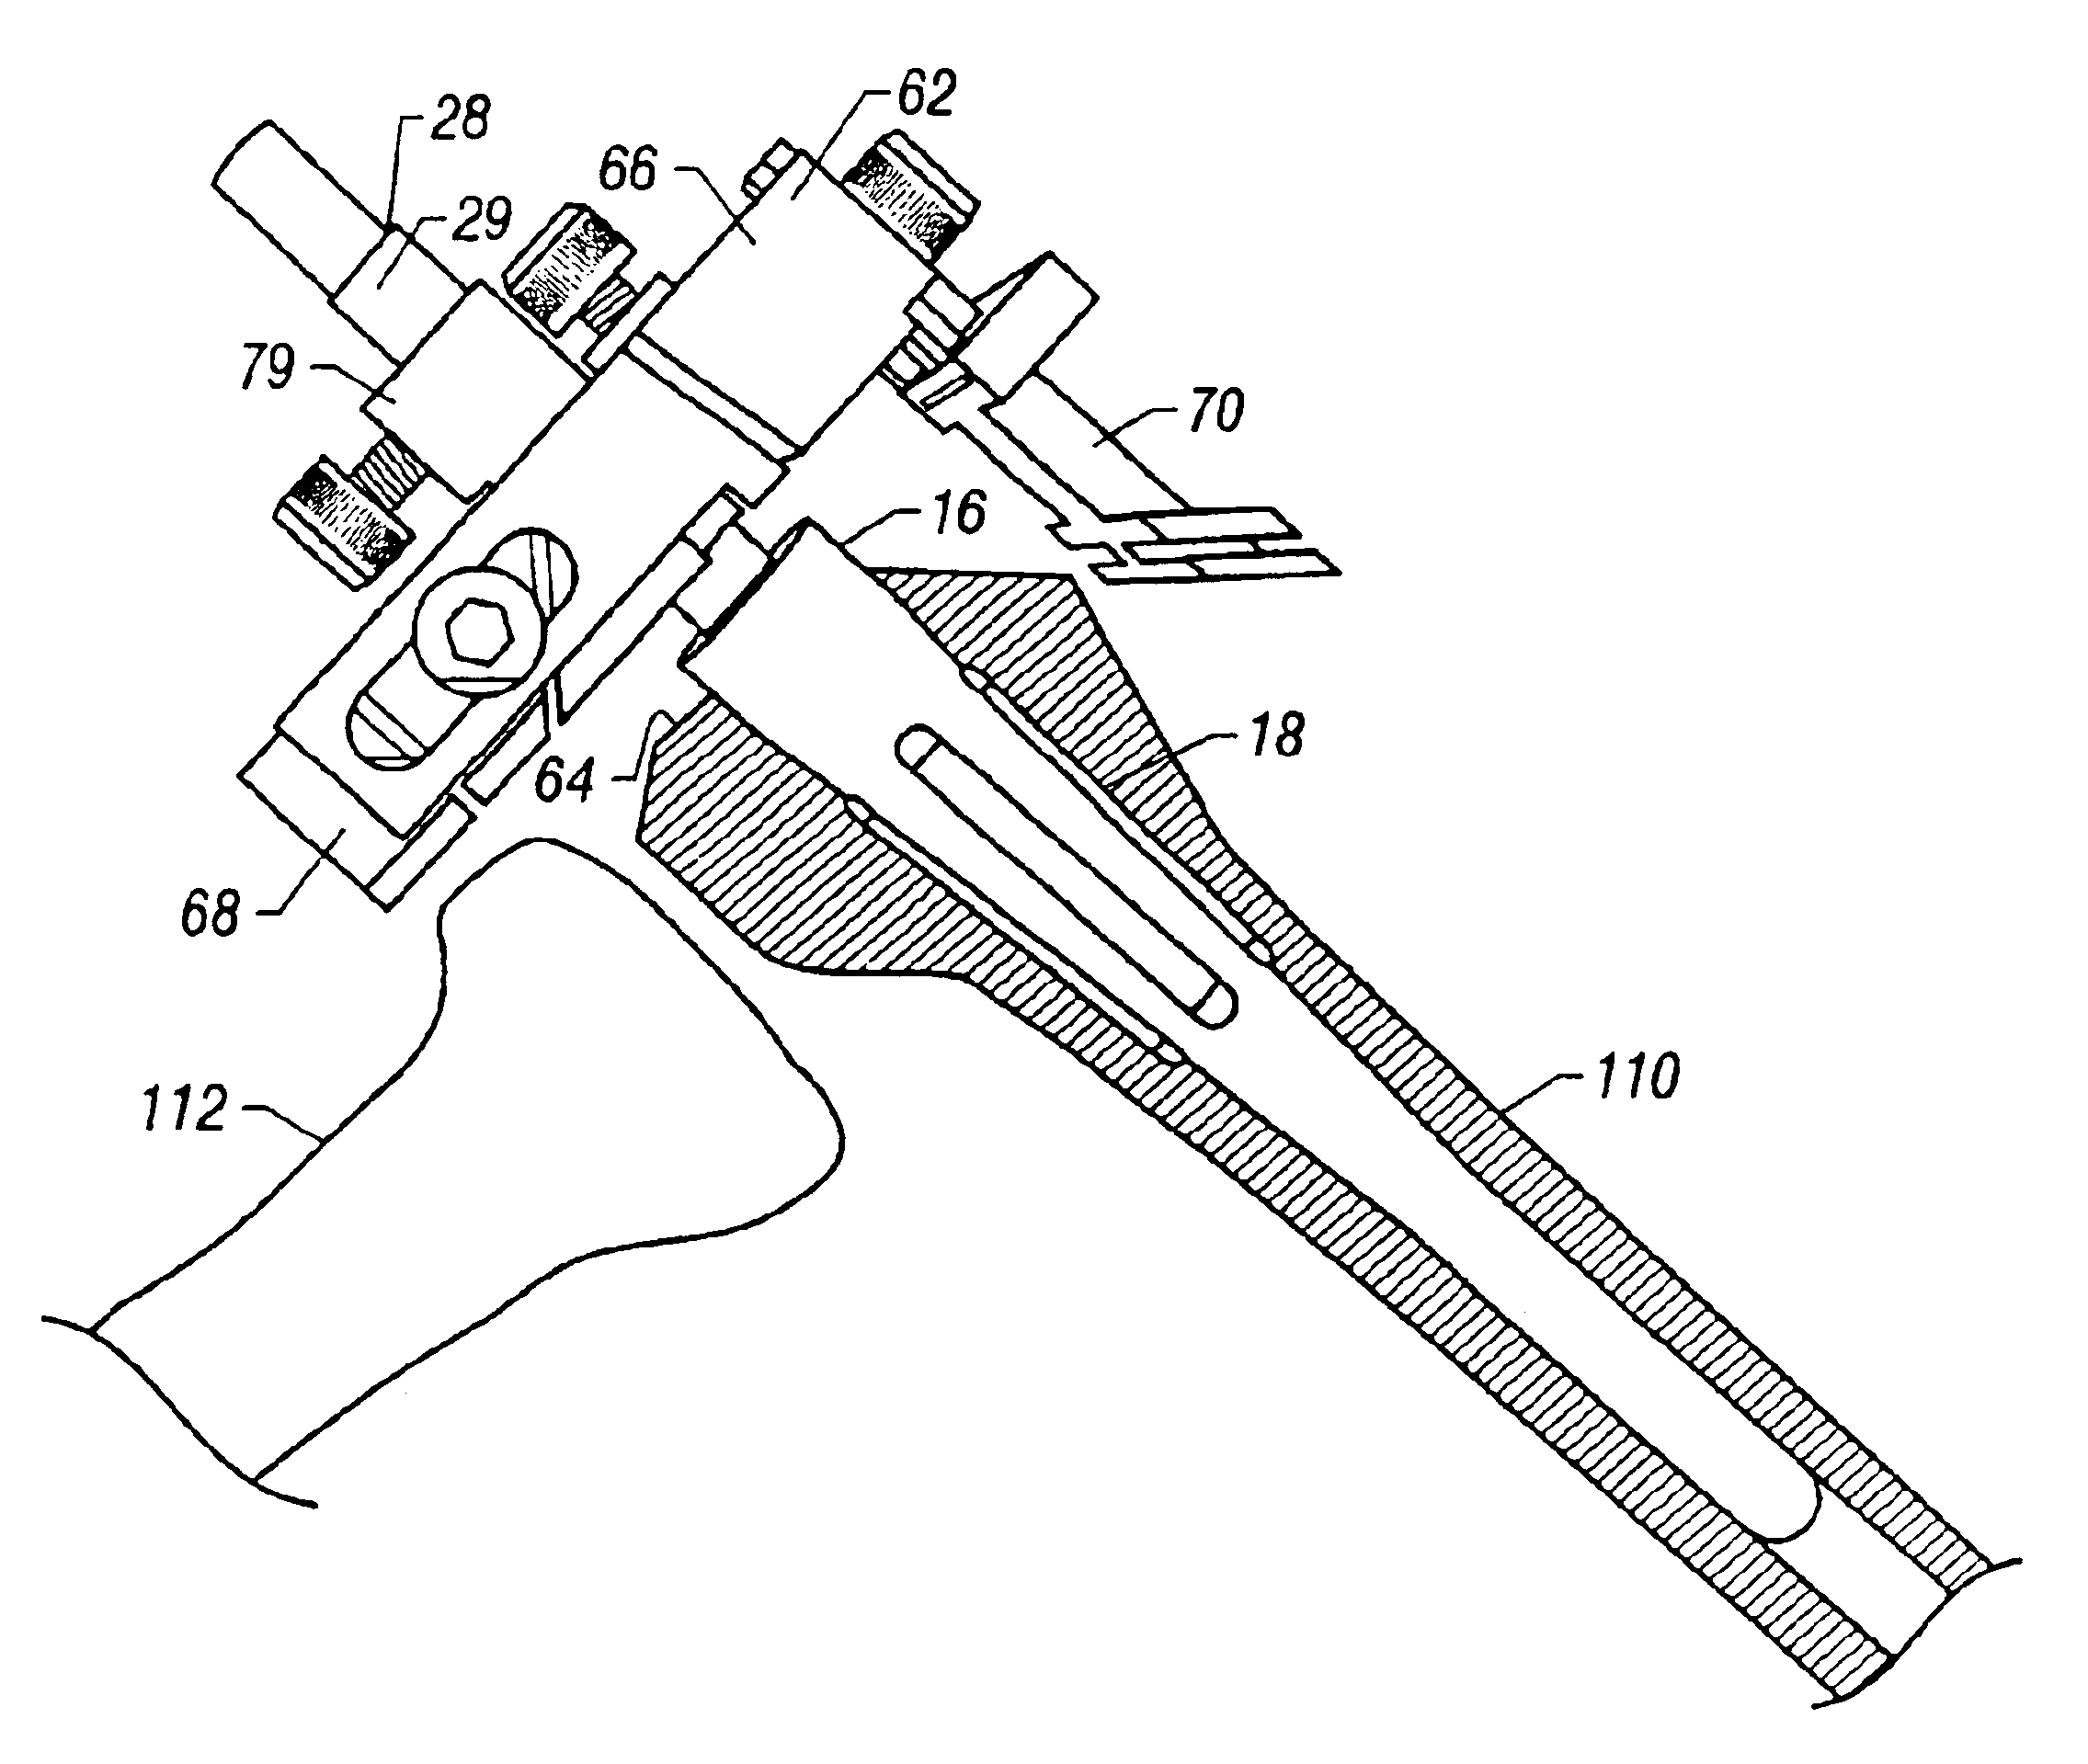 Multi-functional orthopedic surgical instrument and method of using same